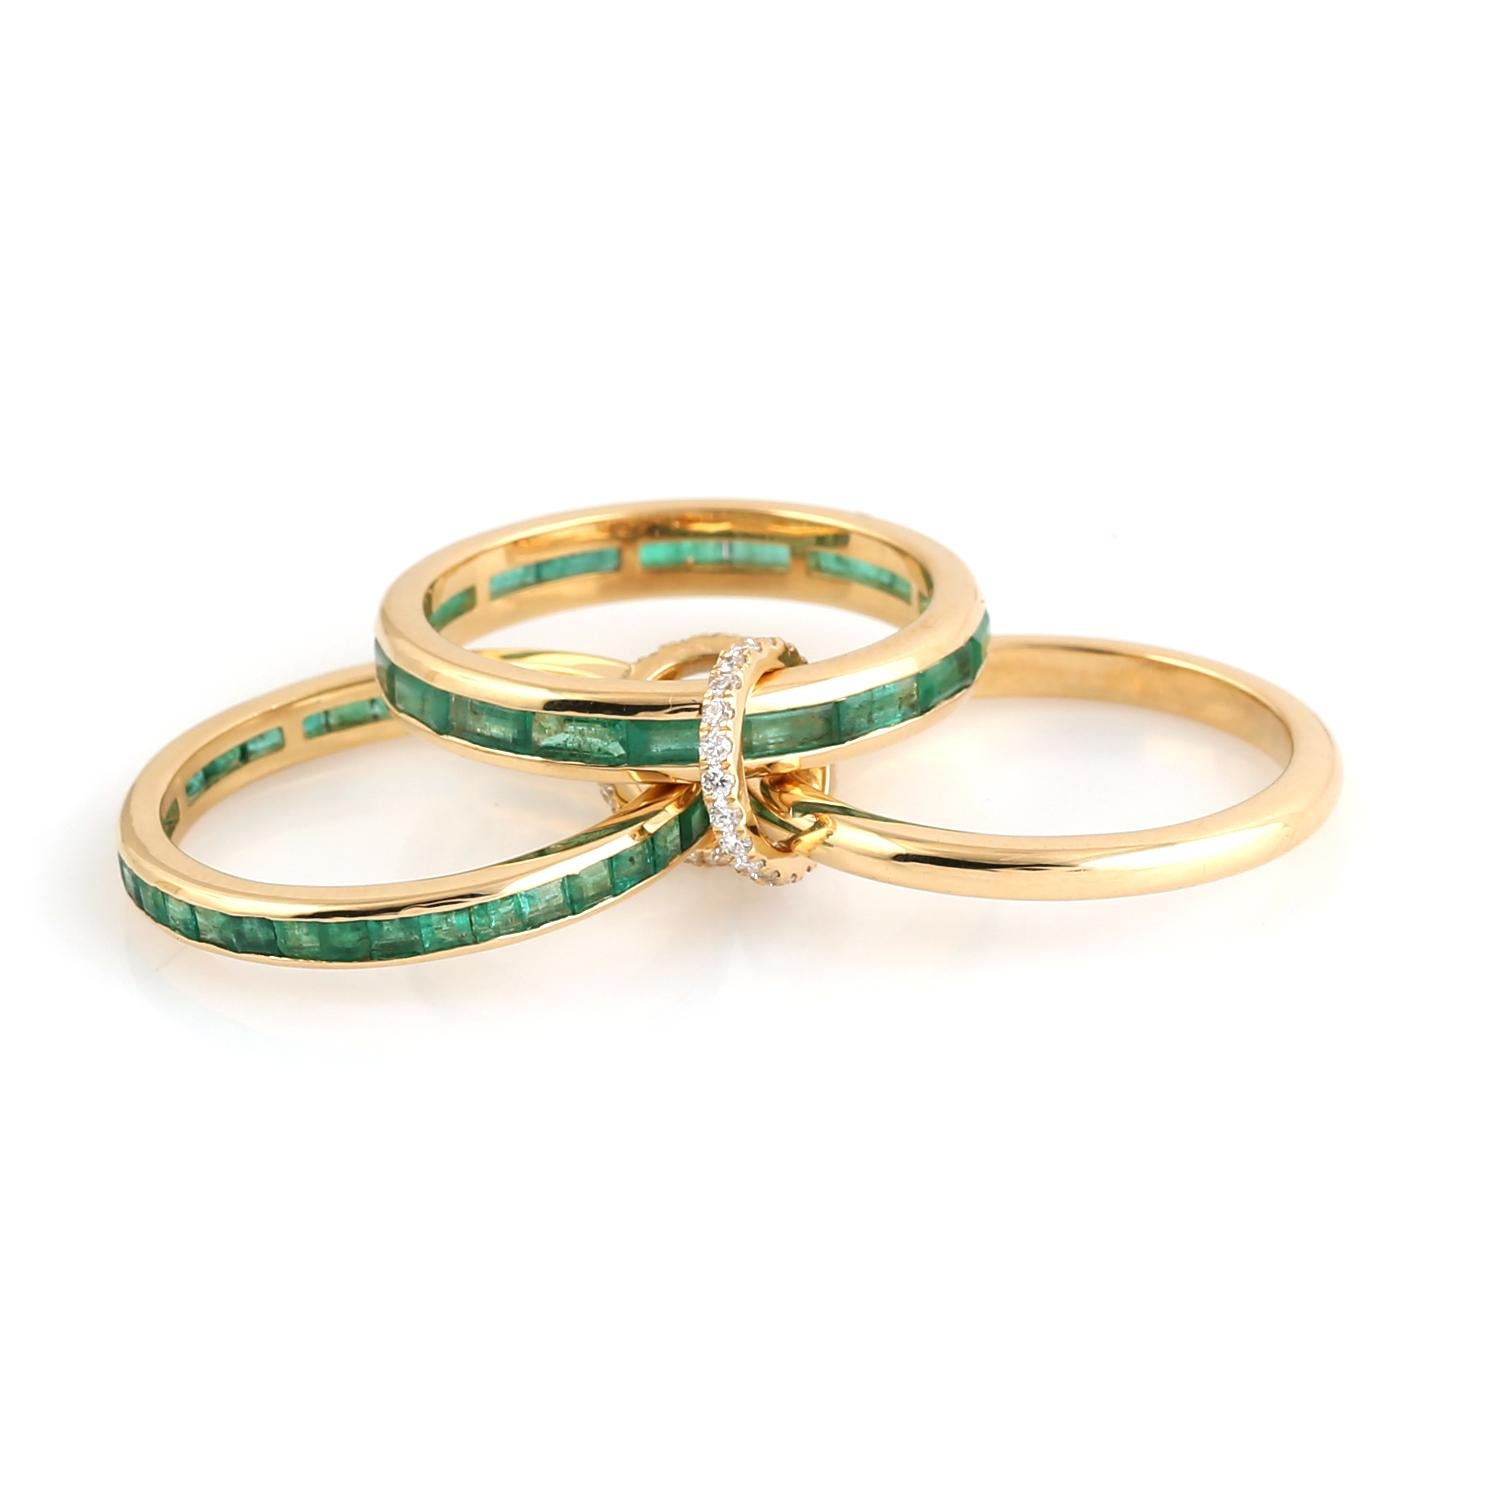 Contemporary Baguette Emerald & Diamond Connected Ring Made In 18k Yellow Gold For Sale